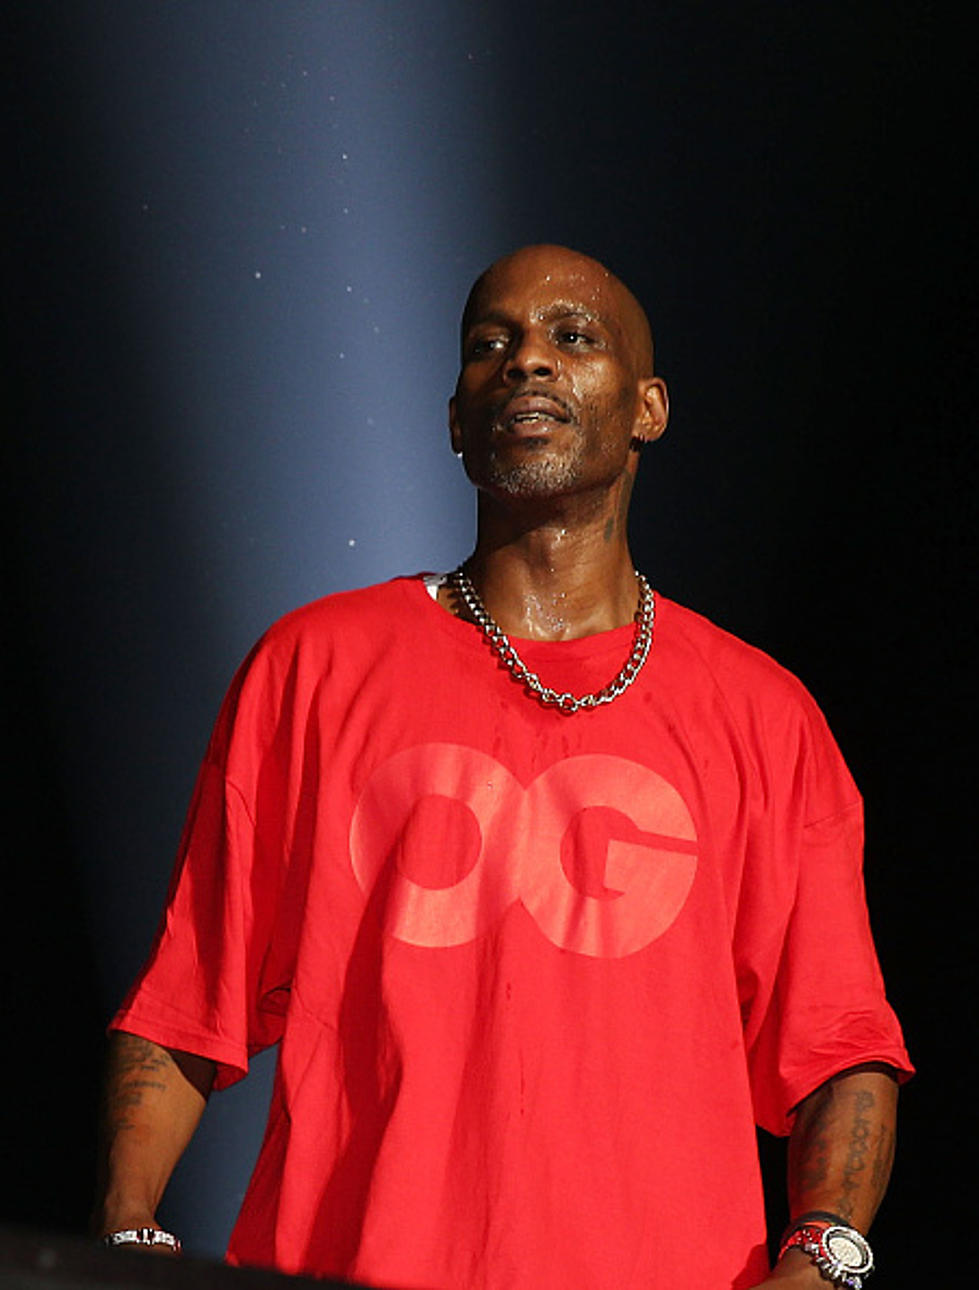 DMX Was A Pioneer Among Rappers On The Albums Chart